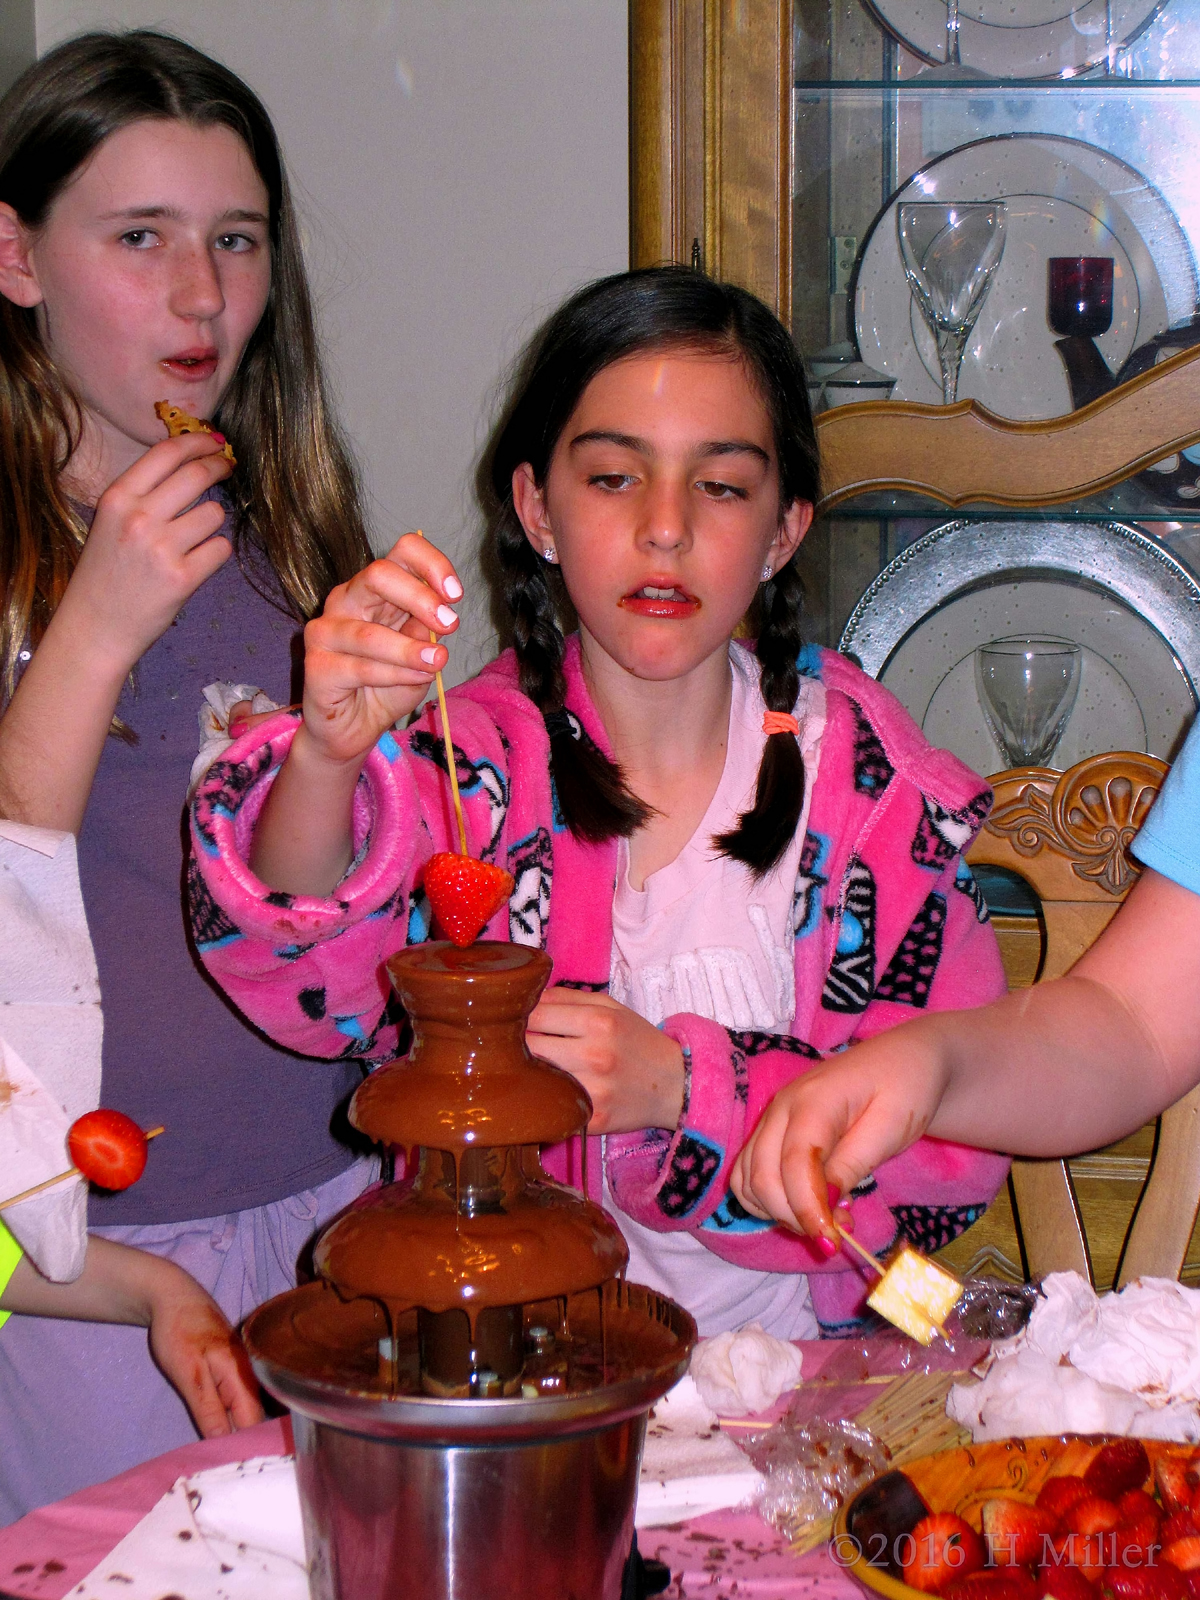 One More Dip Of The Strawberry Into The Awesome Chocolate Fondue! 